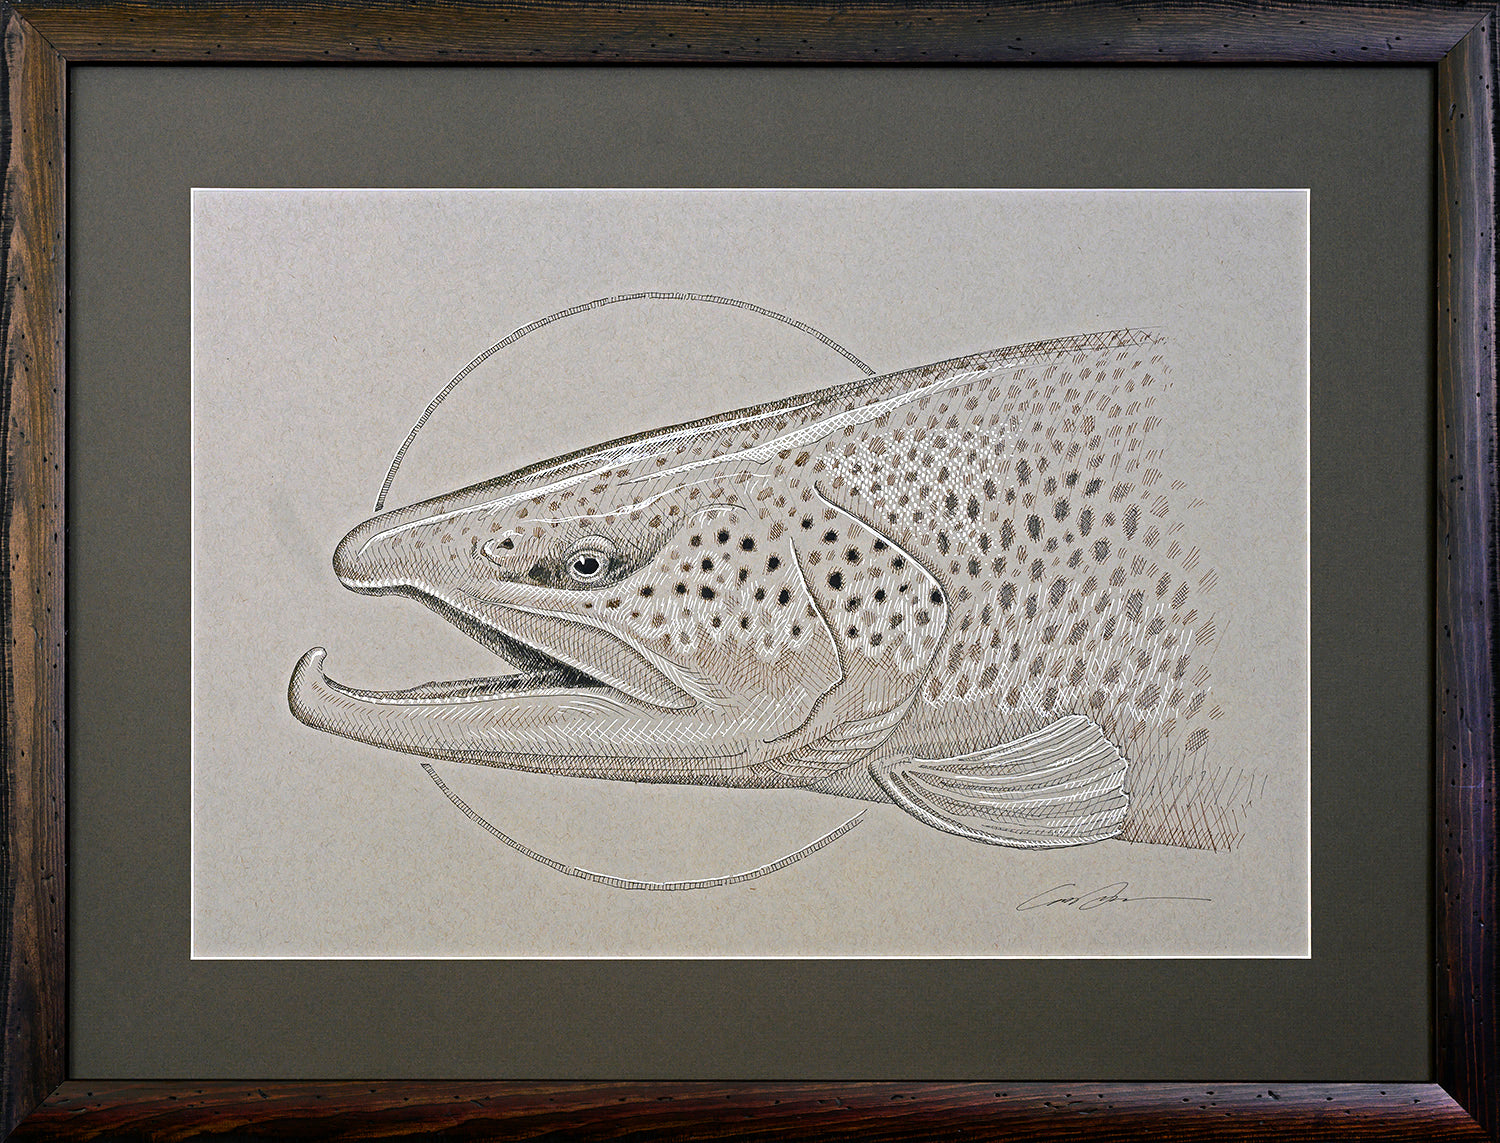 A pen and ink drawing of a brown trout head on toned gray paper. The trout has a circle behind his head. The drawing is framed with a distressed wood frame and earthy green mat.